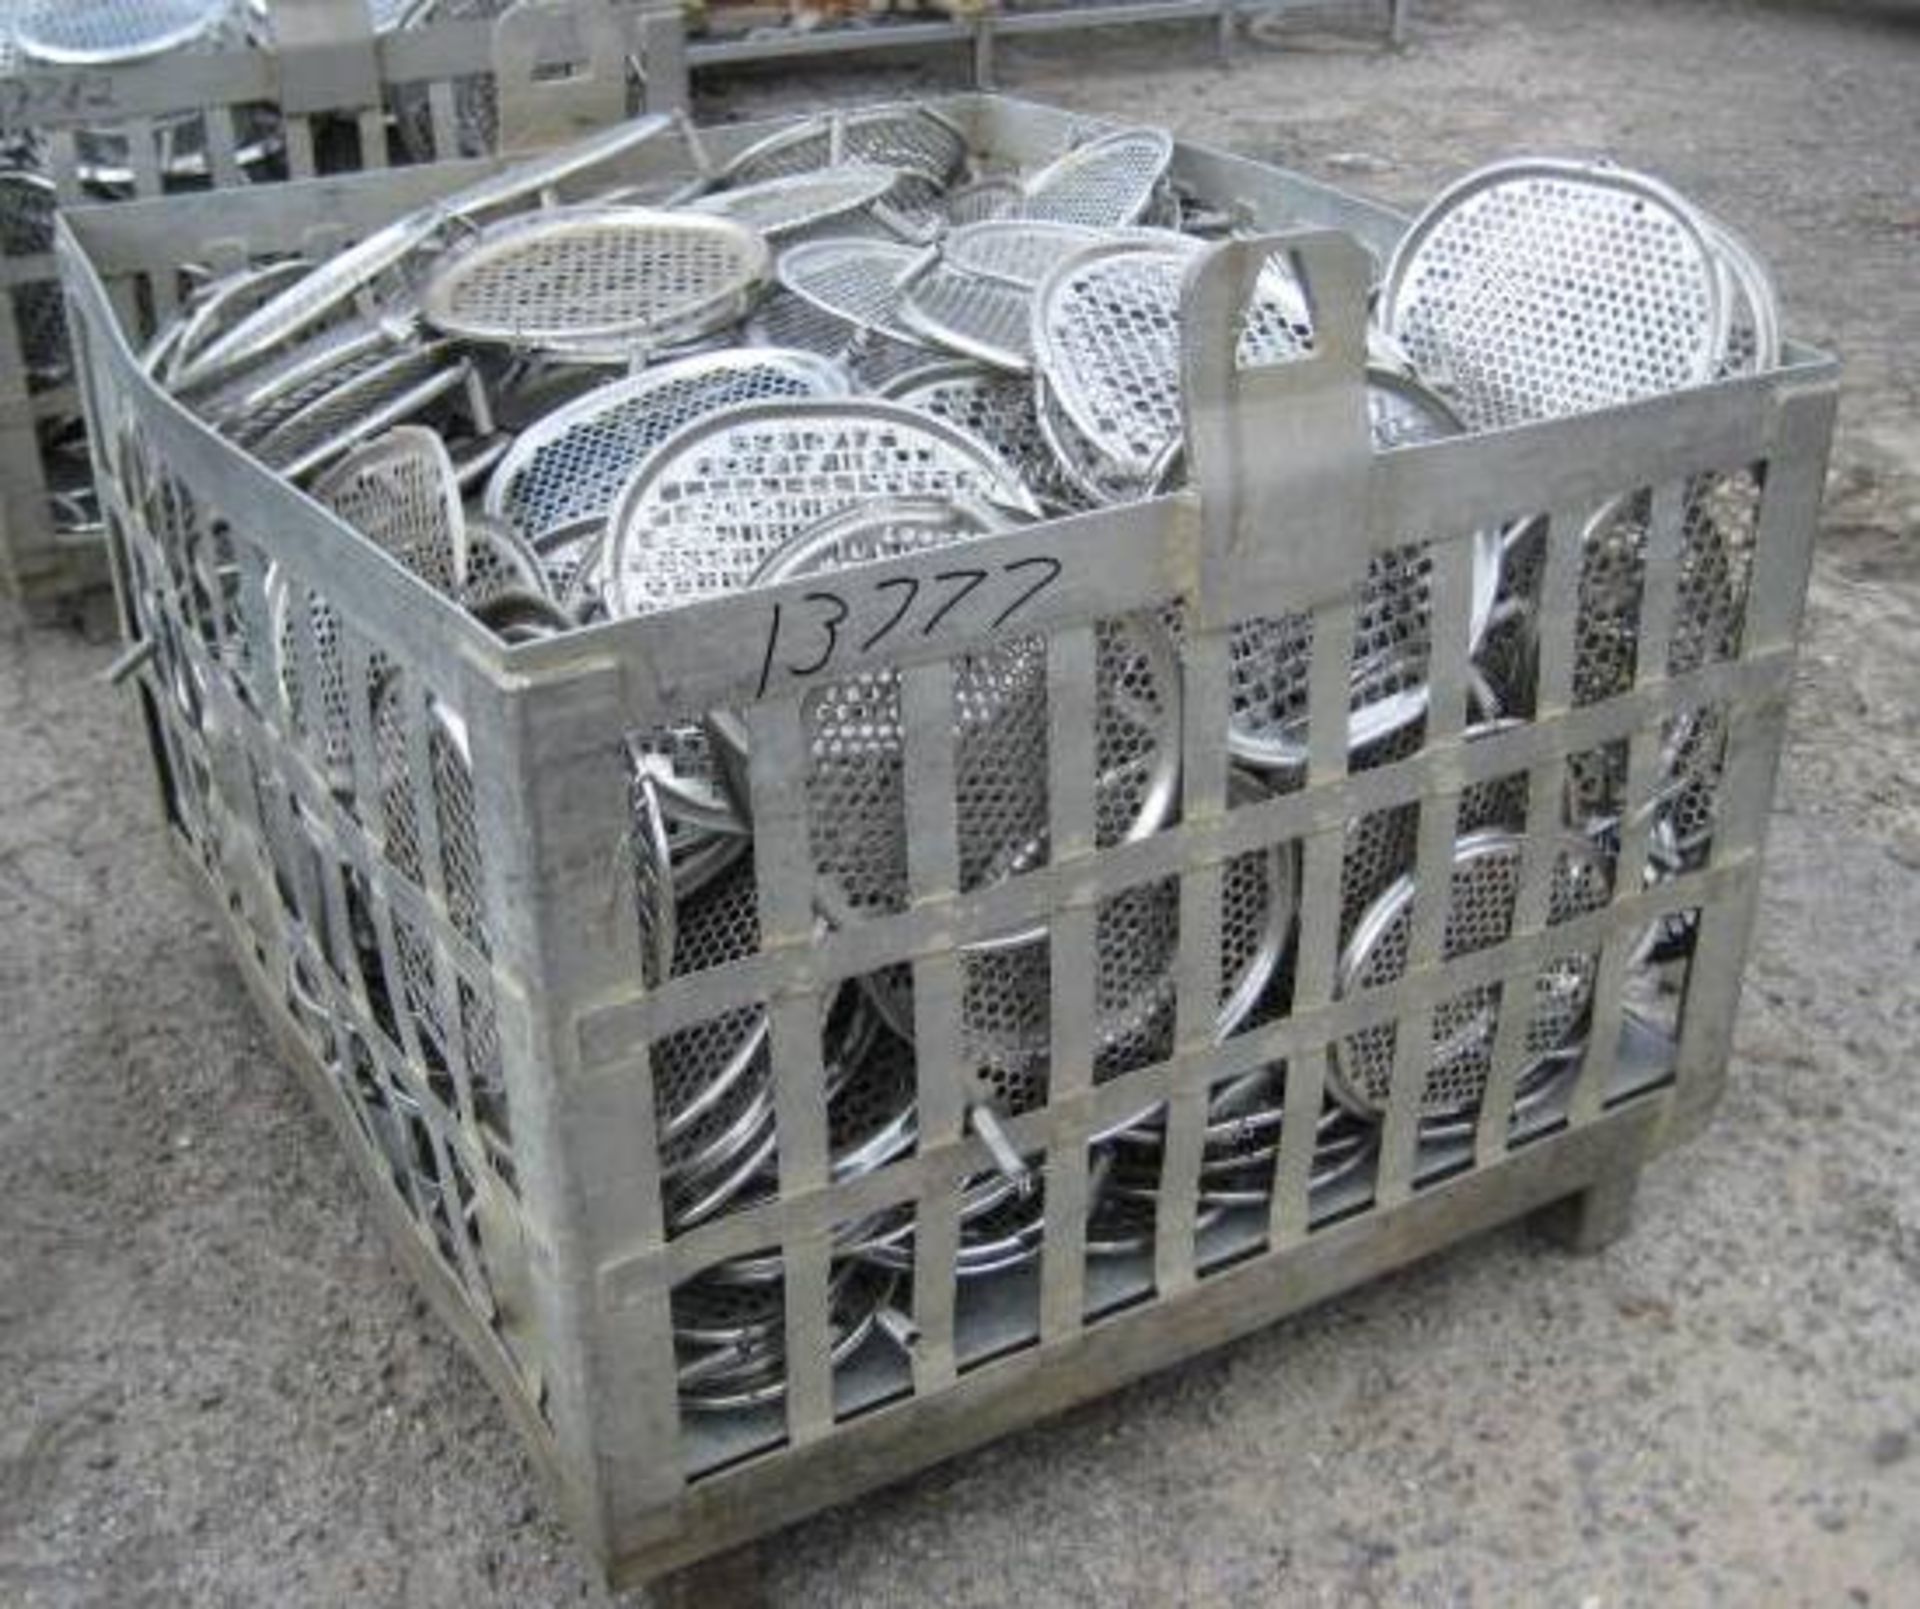 S/S slat basket of oval ham screens, 250 sq screens are 11.5"W by 13.25"L. - Image 2 of 2